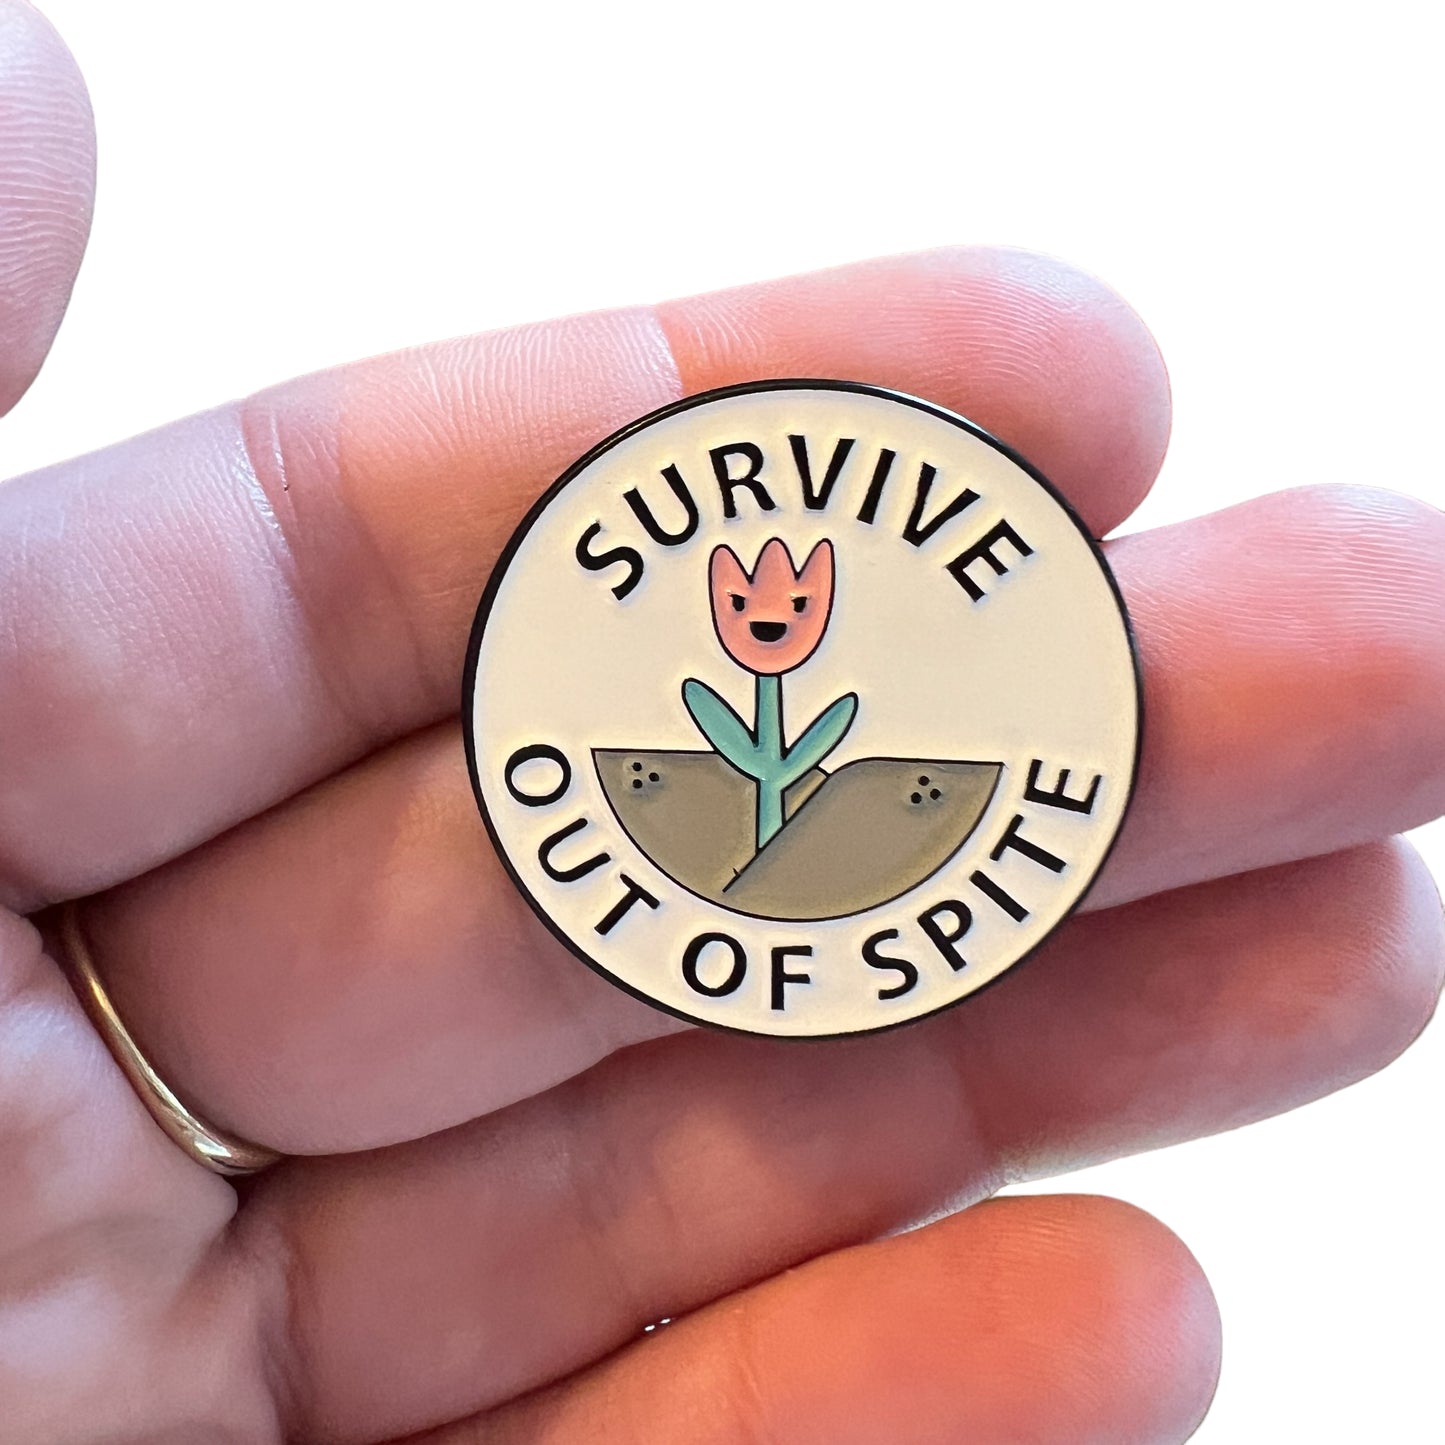 Pin — Survive out of Spite